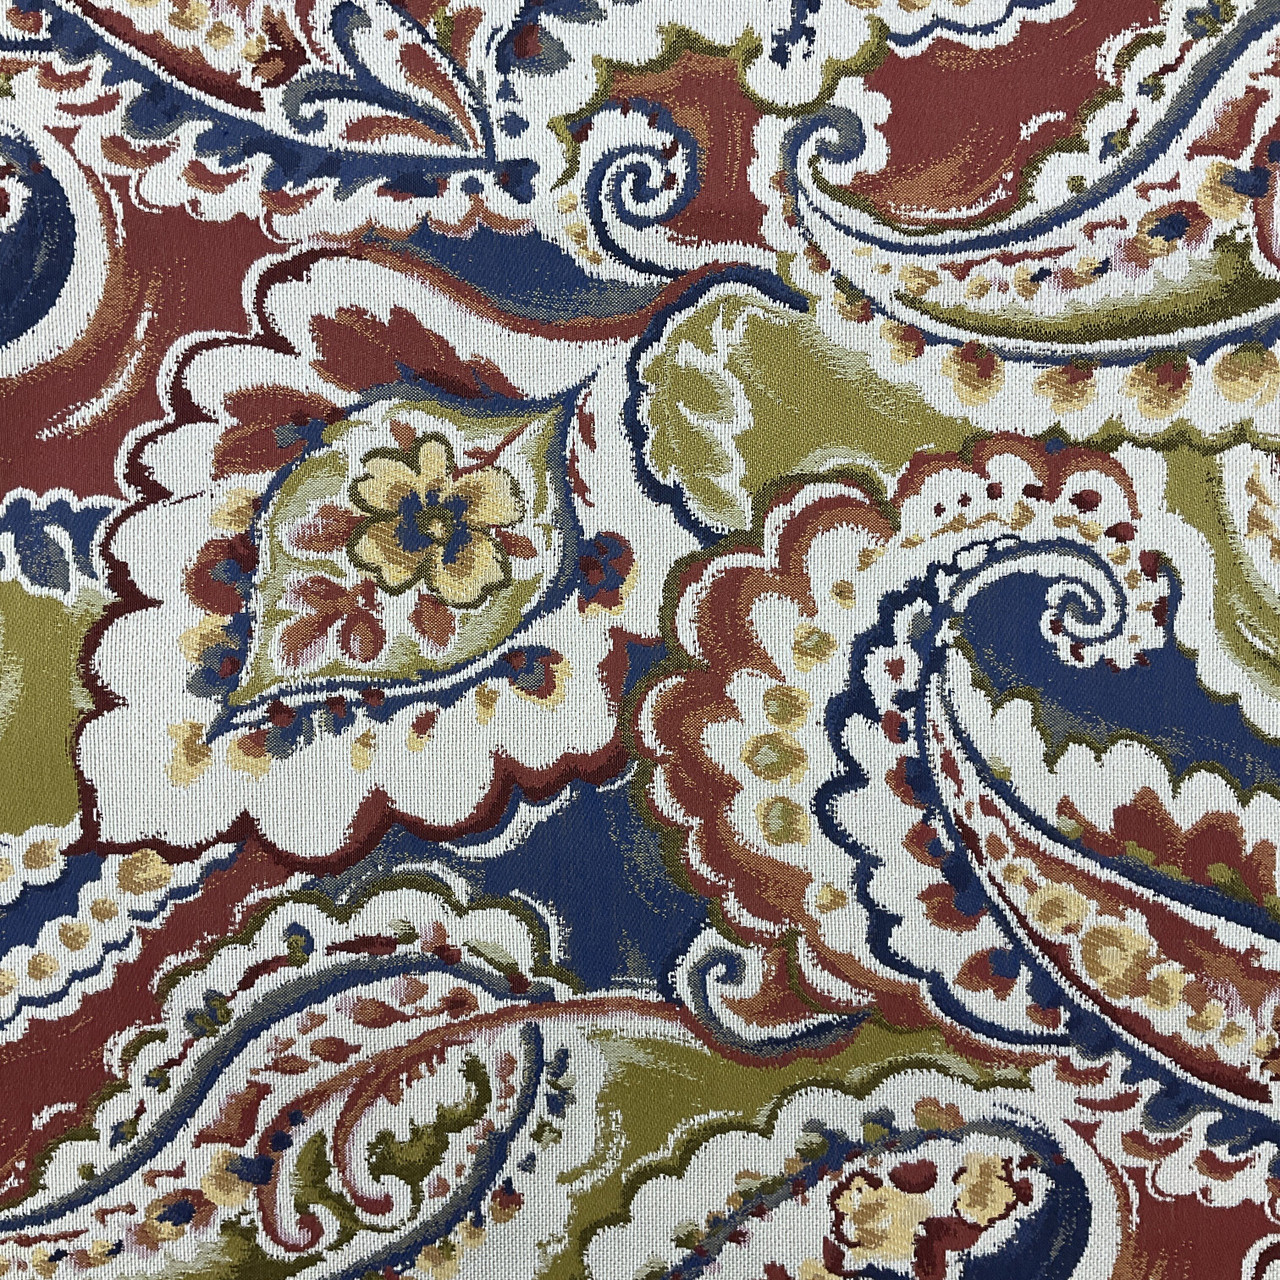 Shop Upholstery Fabric By Color  Buy Fabric Online By The Yard